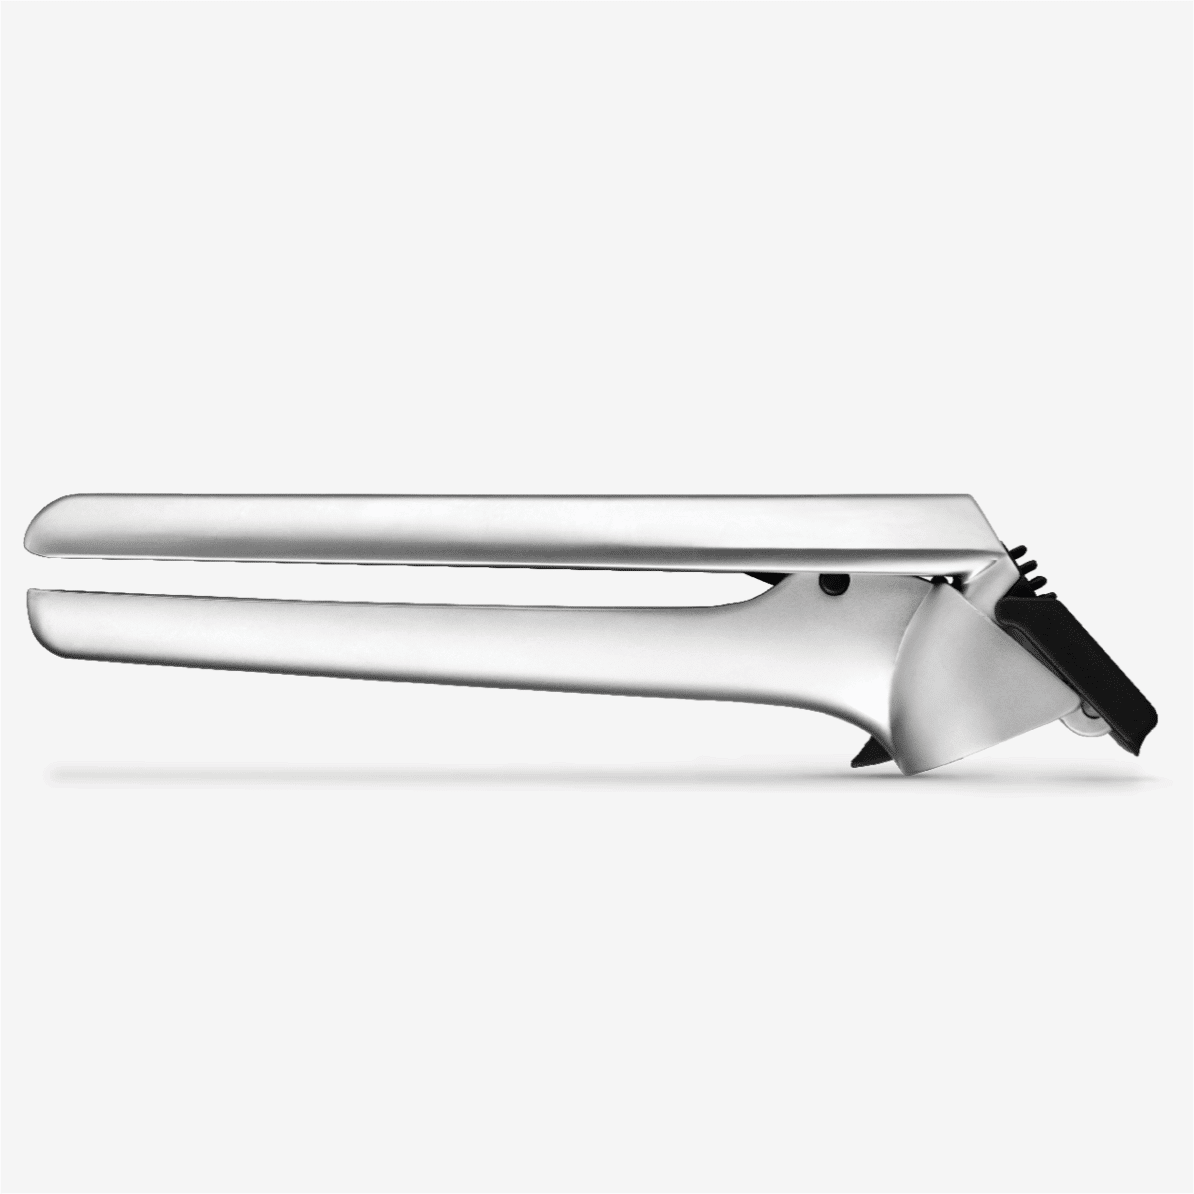 Meet the Garject heavy-duty garlic press!&nbsp; Pop in your UNPEELED garlic cloves, press, the Garject will scrape the pressed garlic right into dish, and then ejects the rest!&nbsp; No more smelly garlic hands. No more garlic peeling. No more trying to scrape the peel out with your fingers.